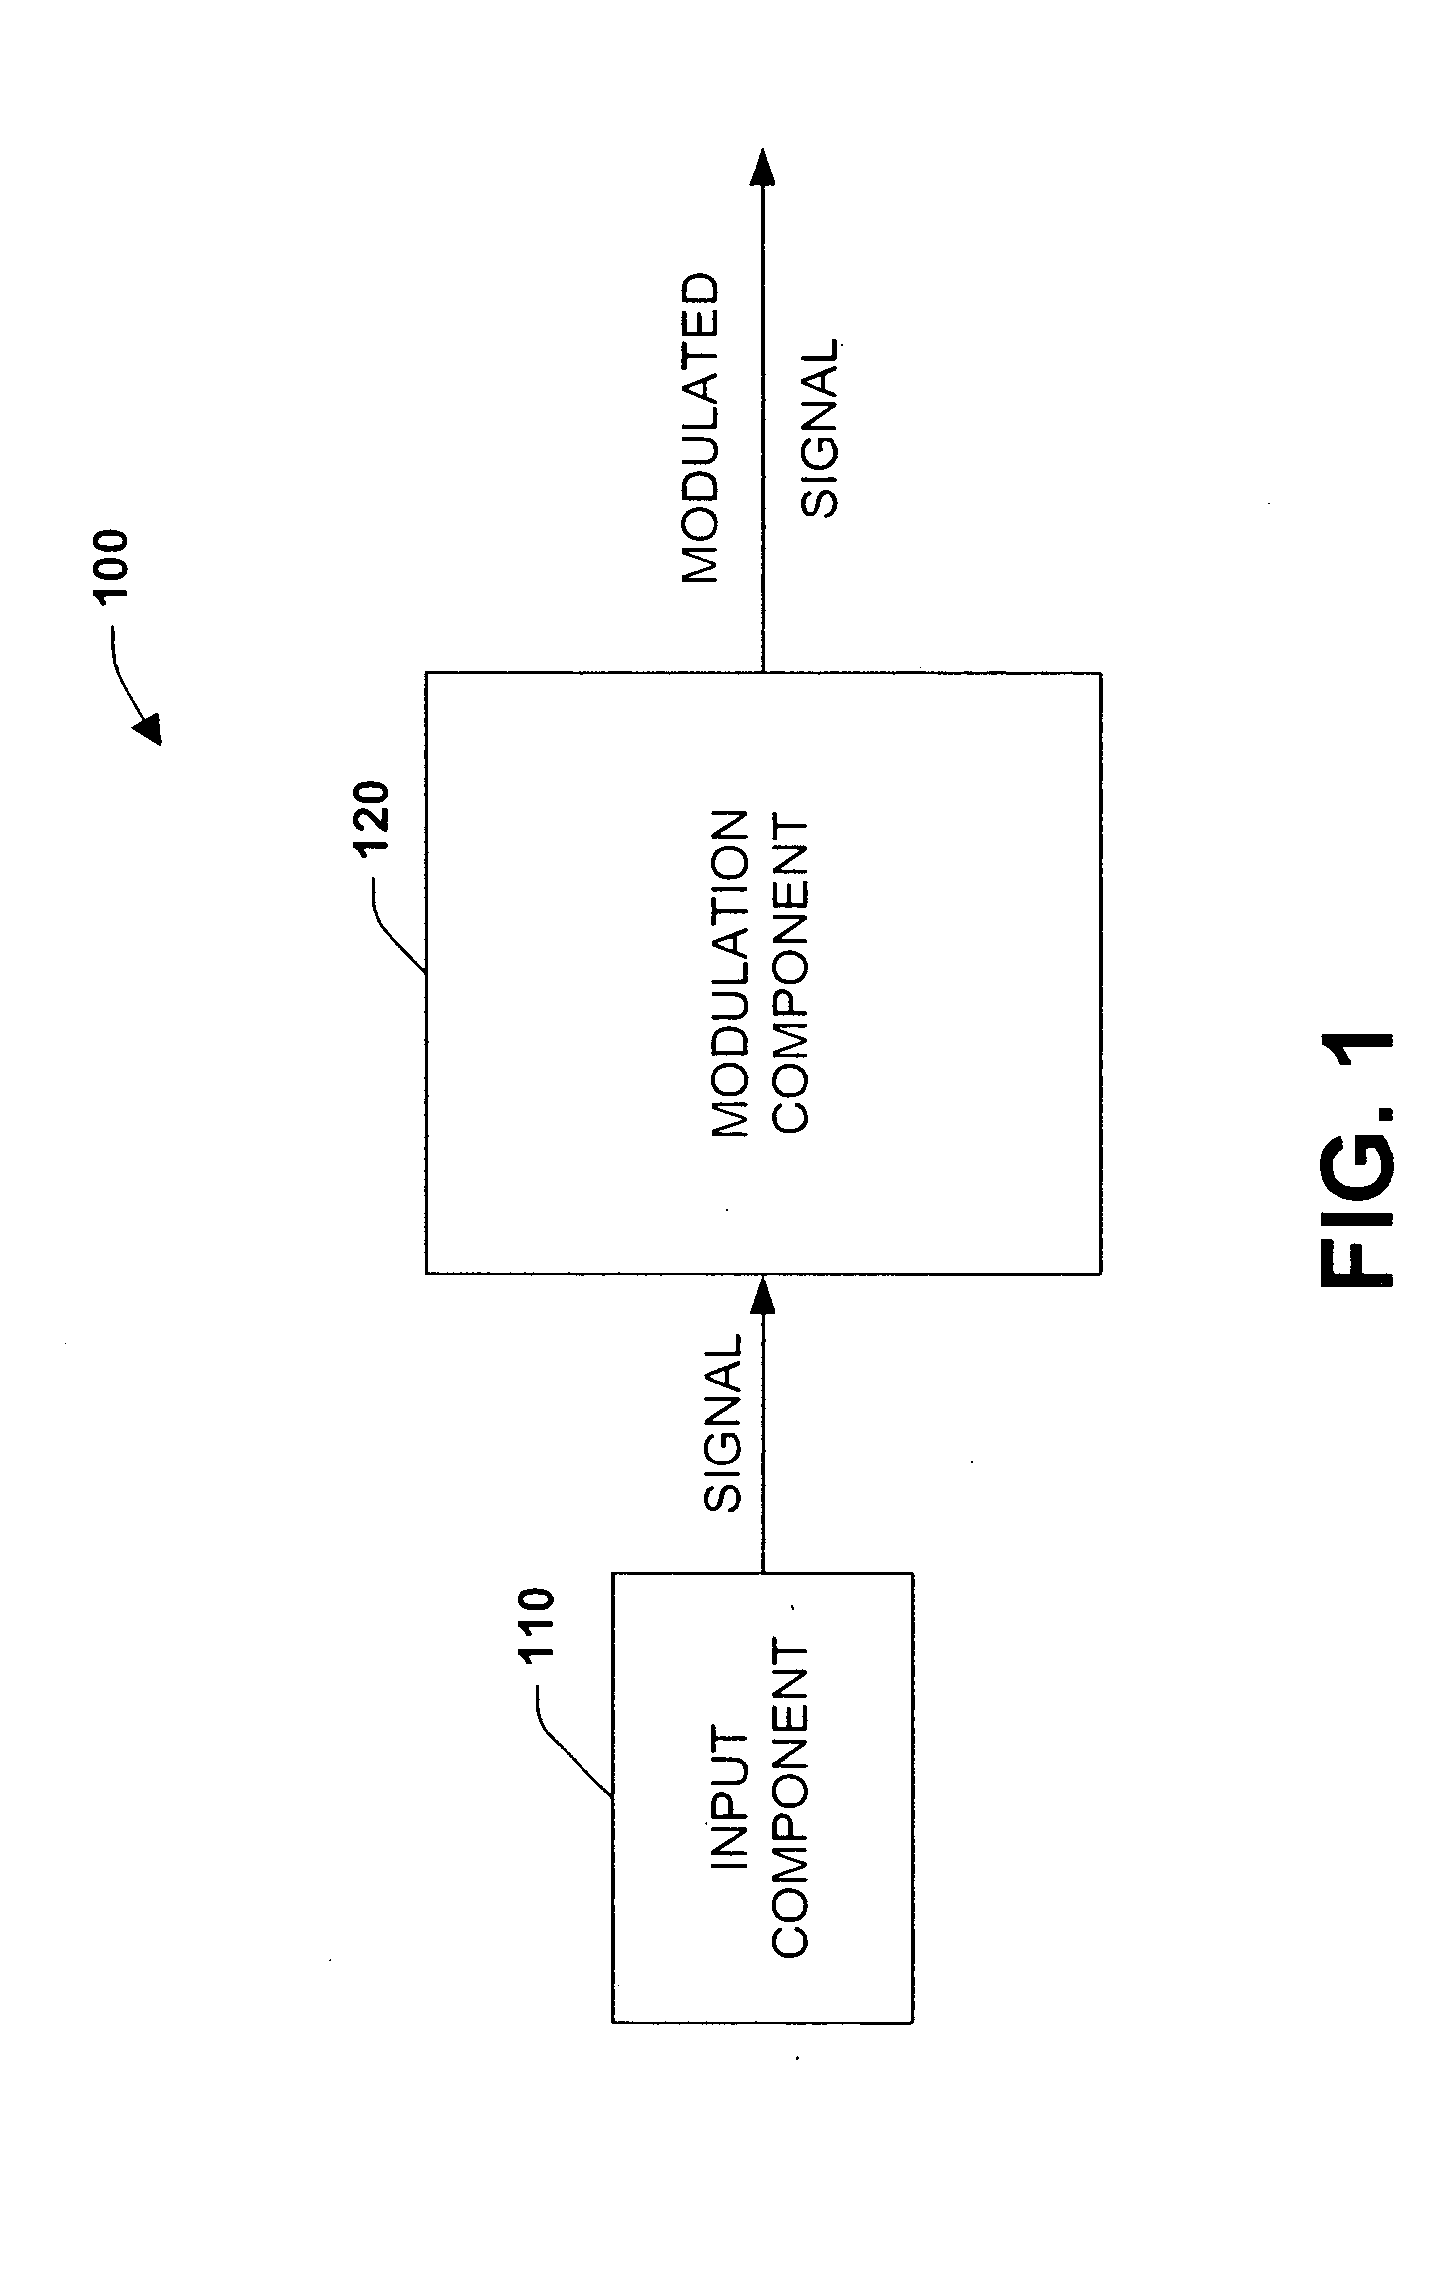 Systems and methods for low loss monolithic extremely high frequency quadra-phase shift key modulation